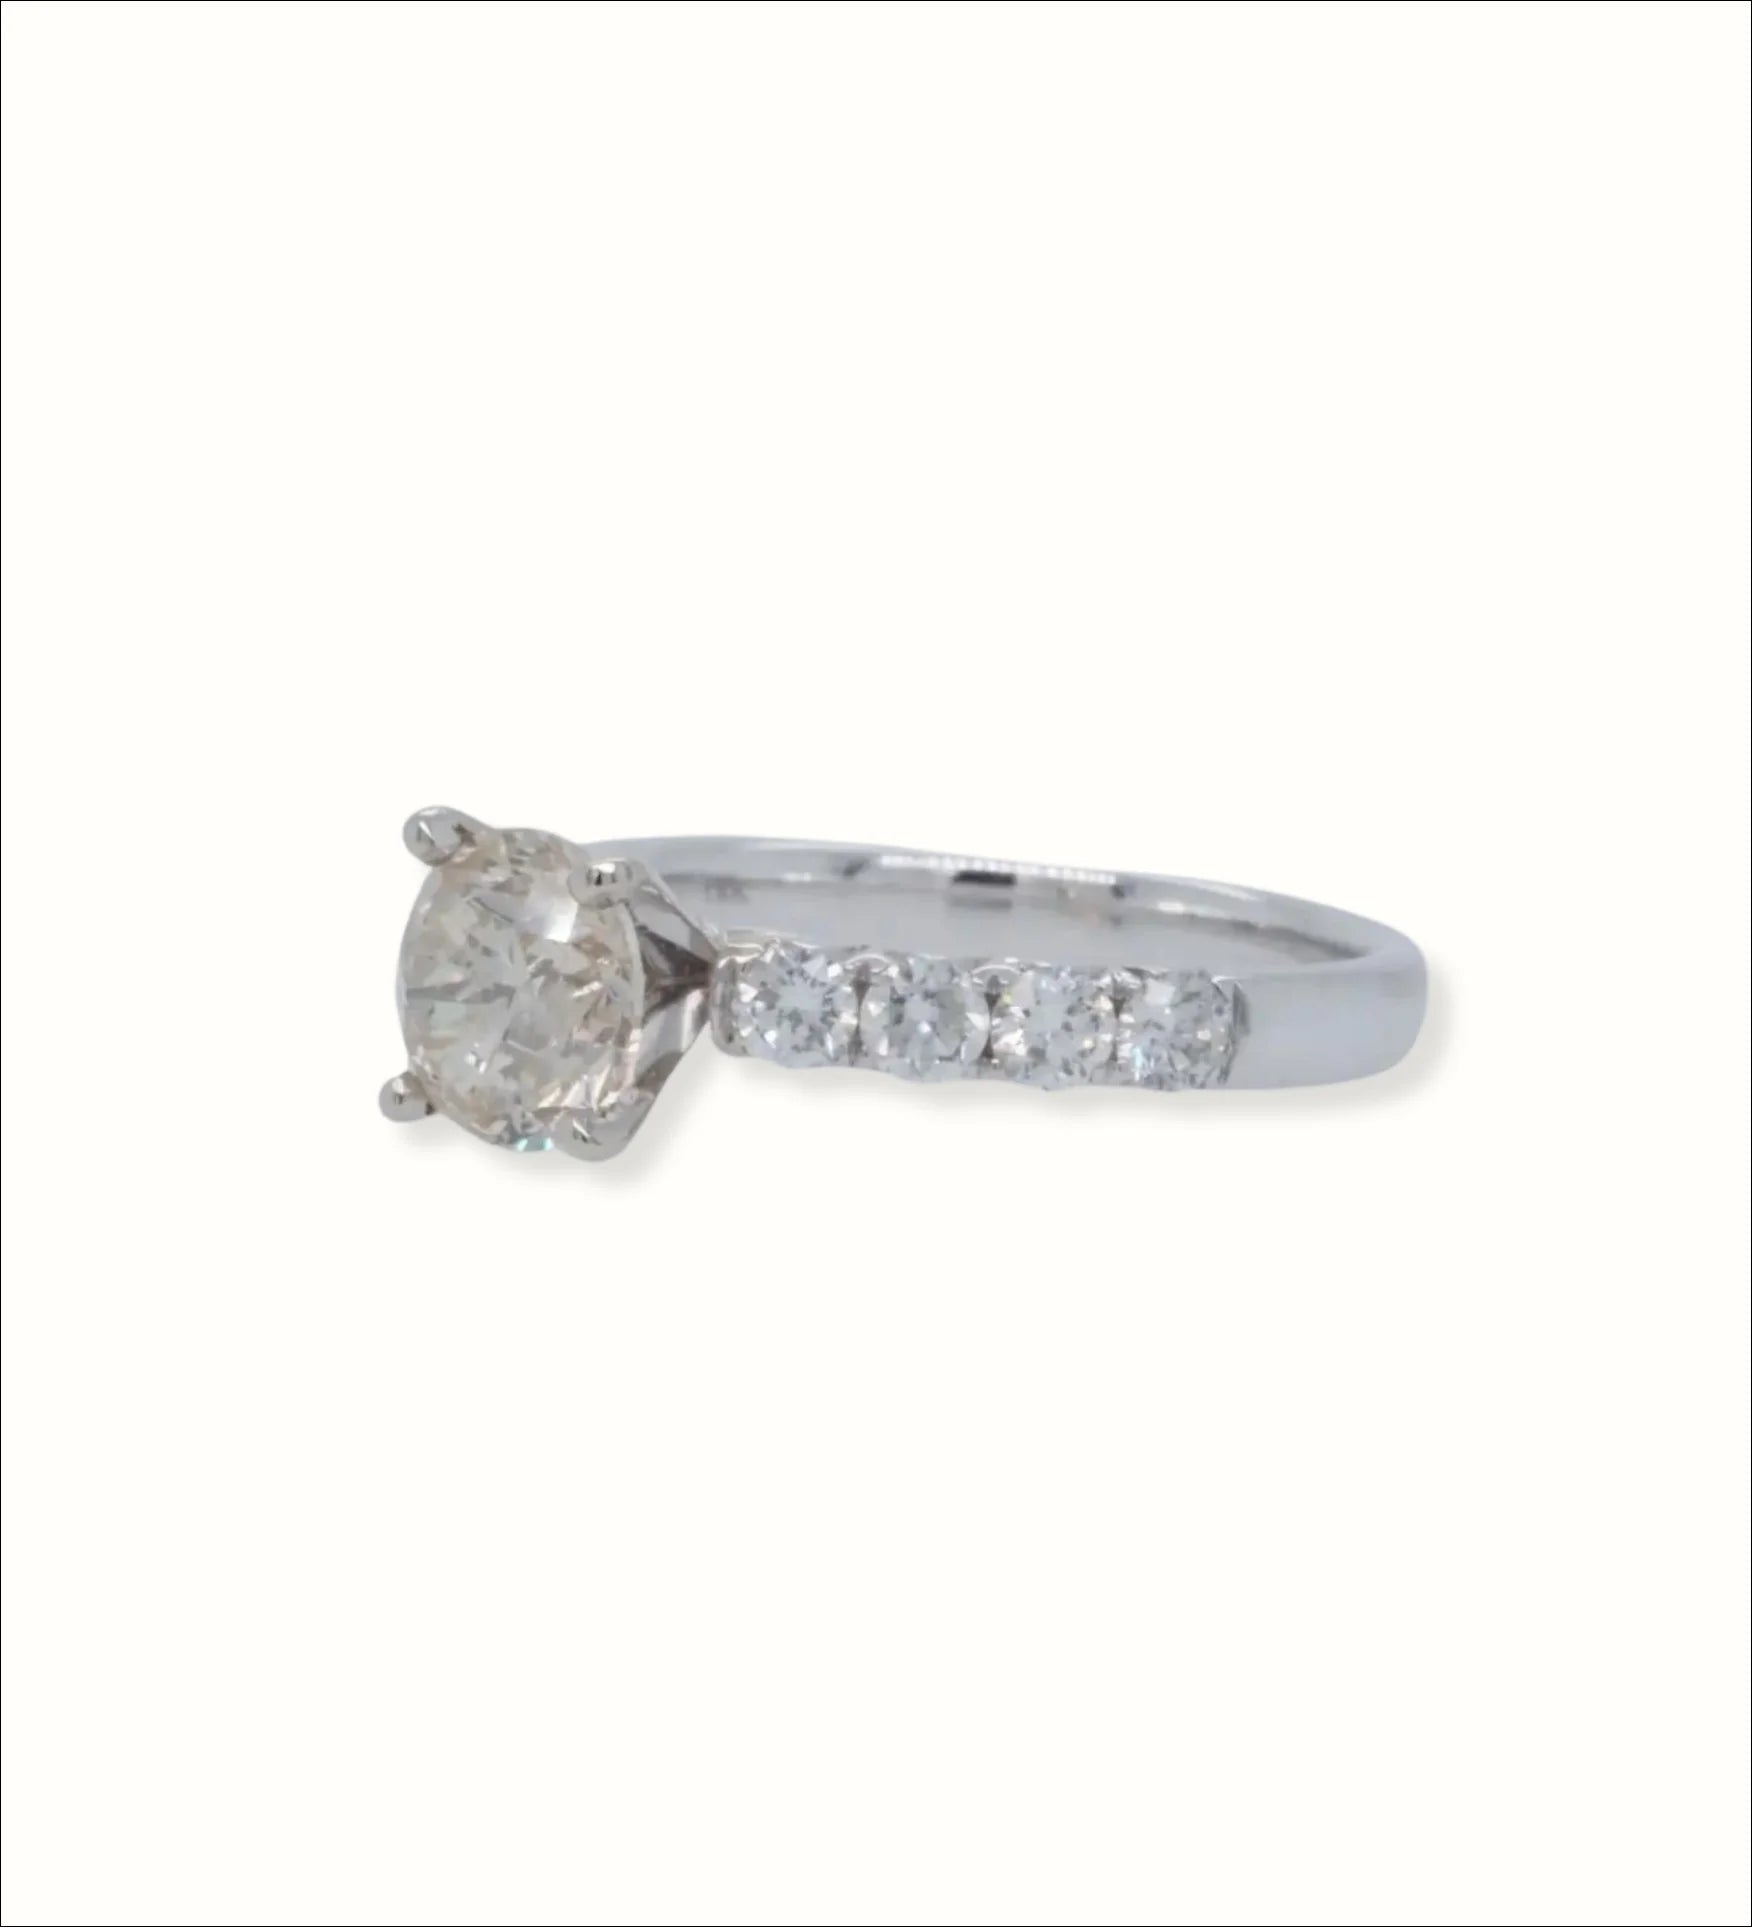 Eternal Love 18k White Gold Ring with 1.35ct Diamond | Home